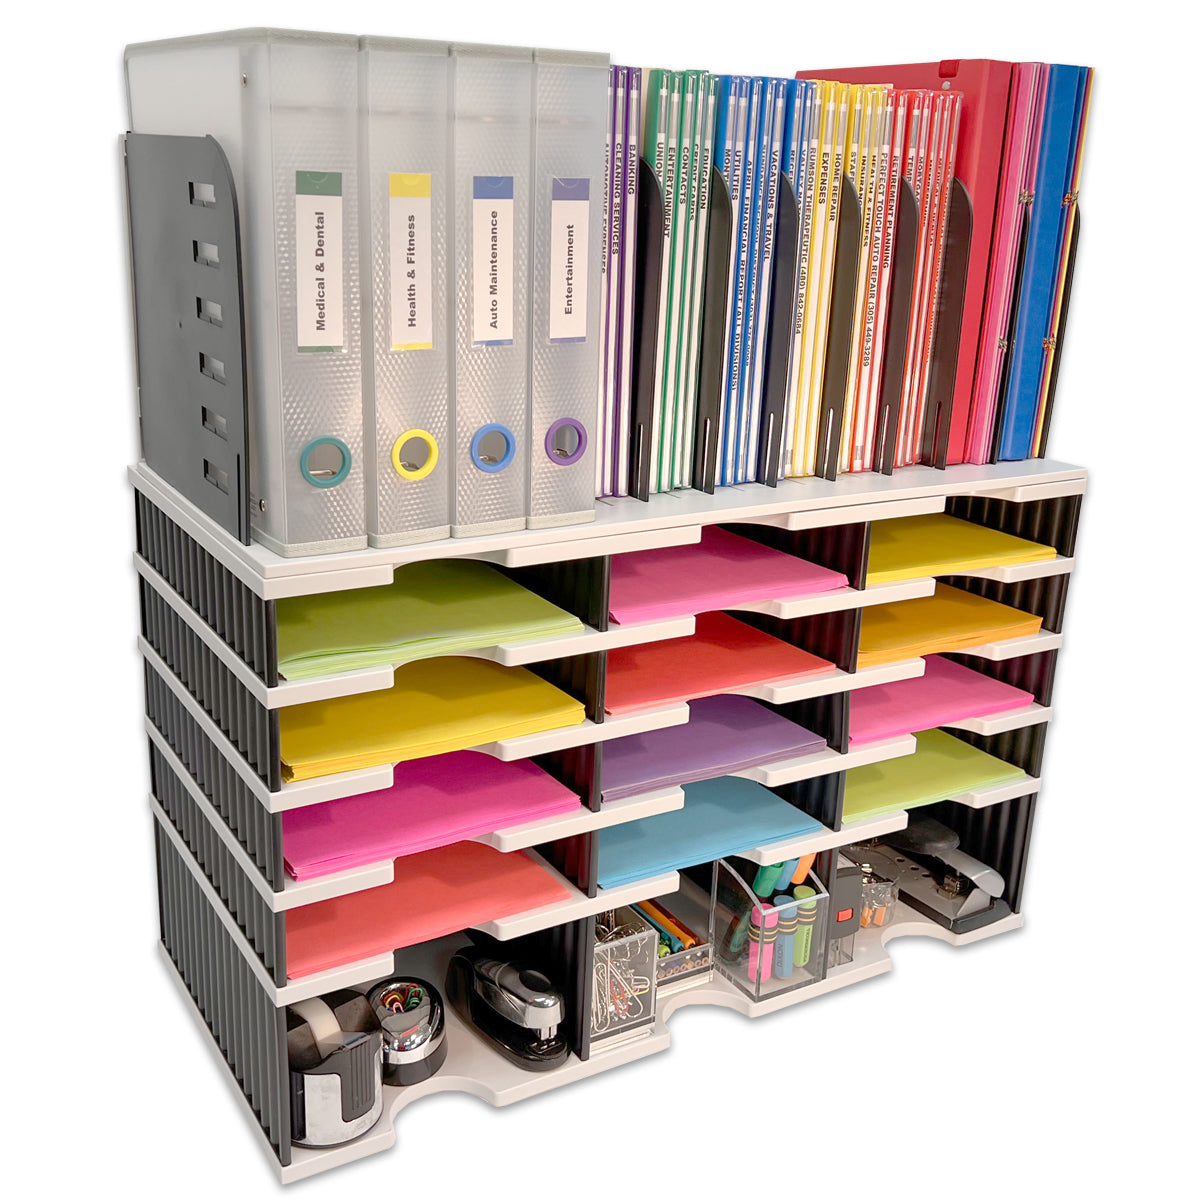 Organize Your Scrapbooking Papers with Vertical 12x12 Storage